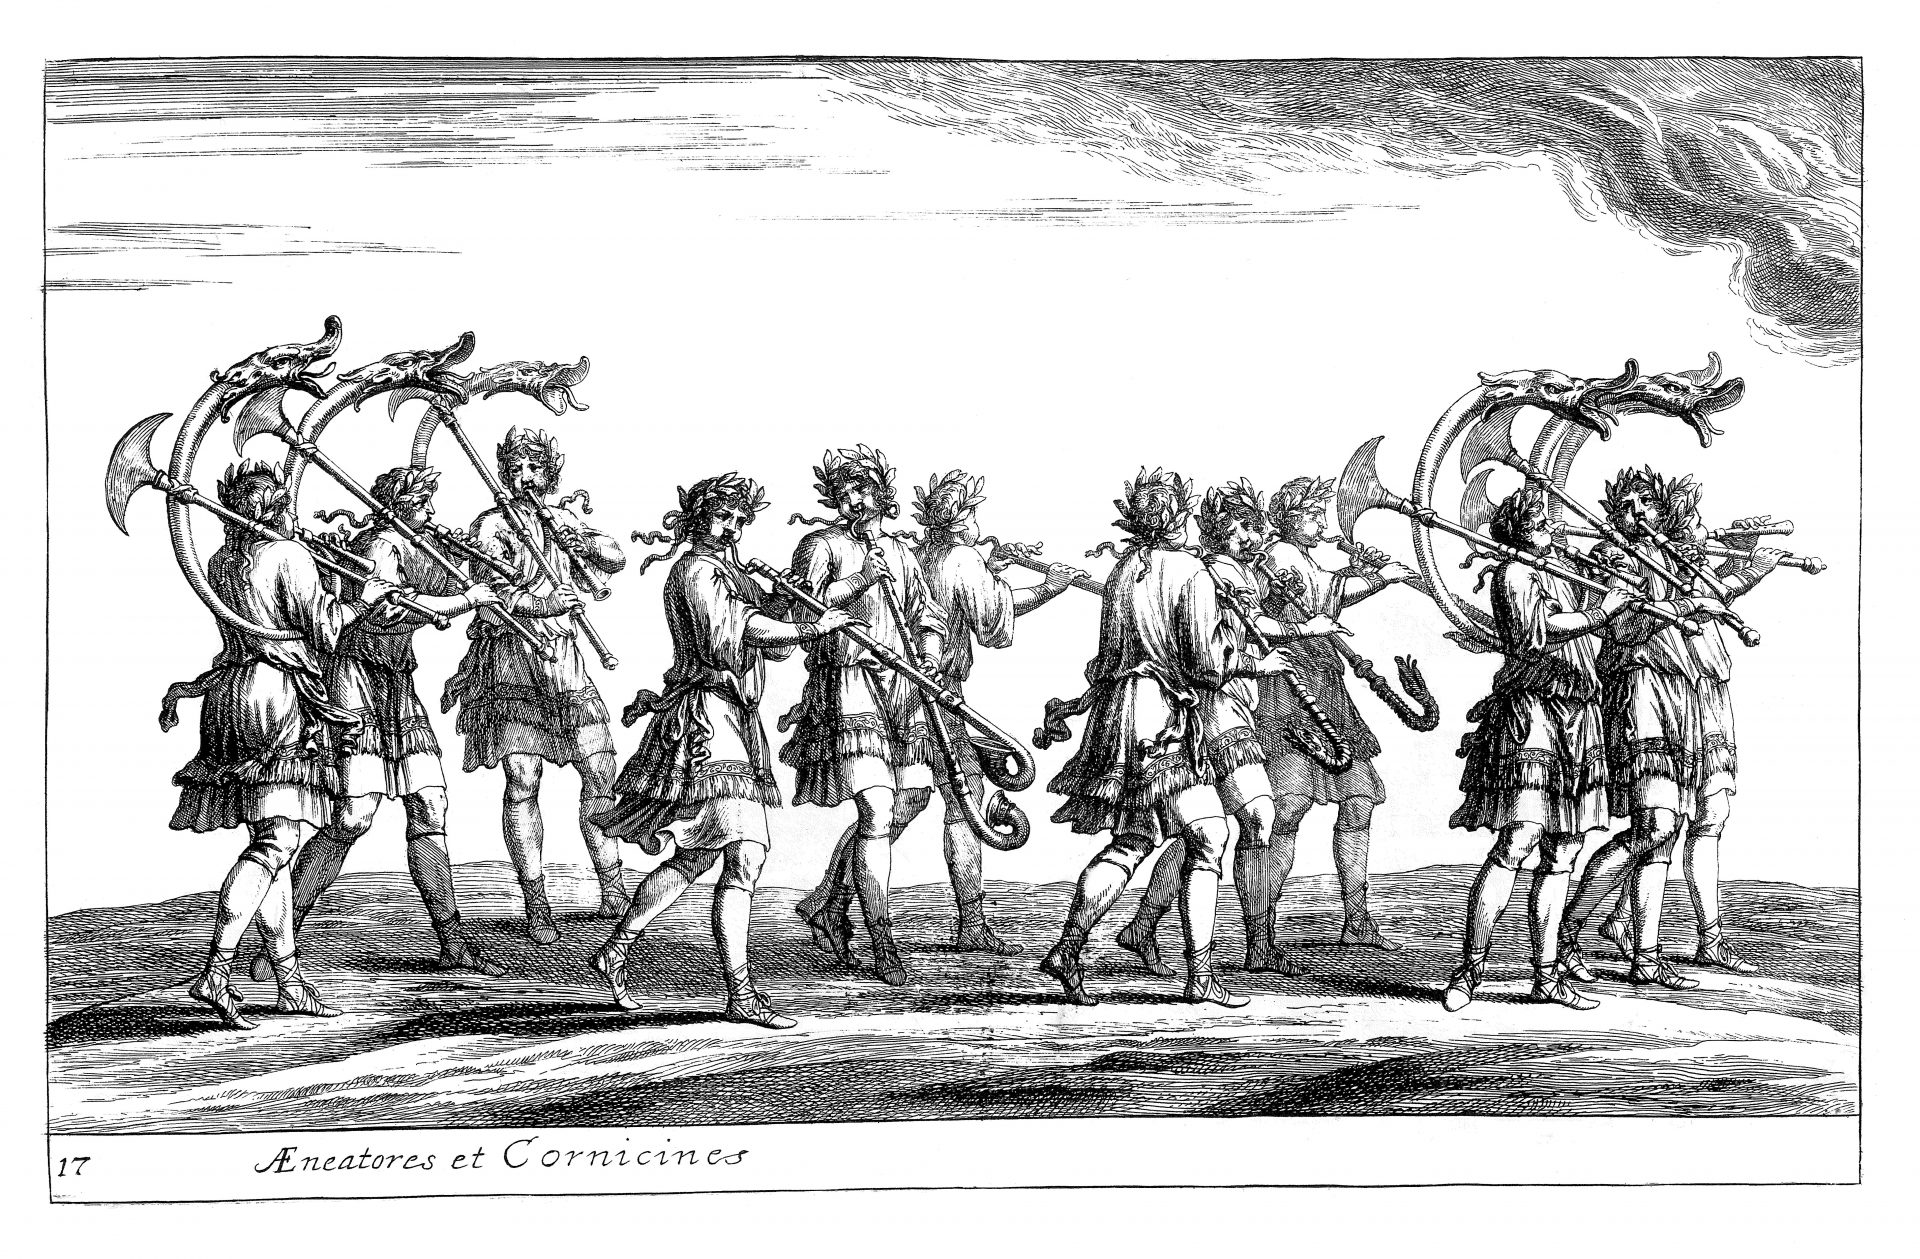 Engraving of a group of people with instruments.